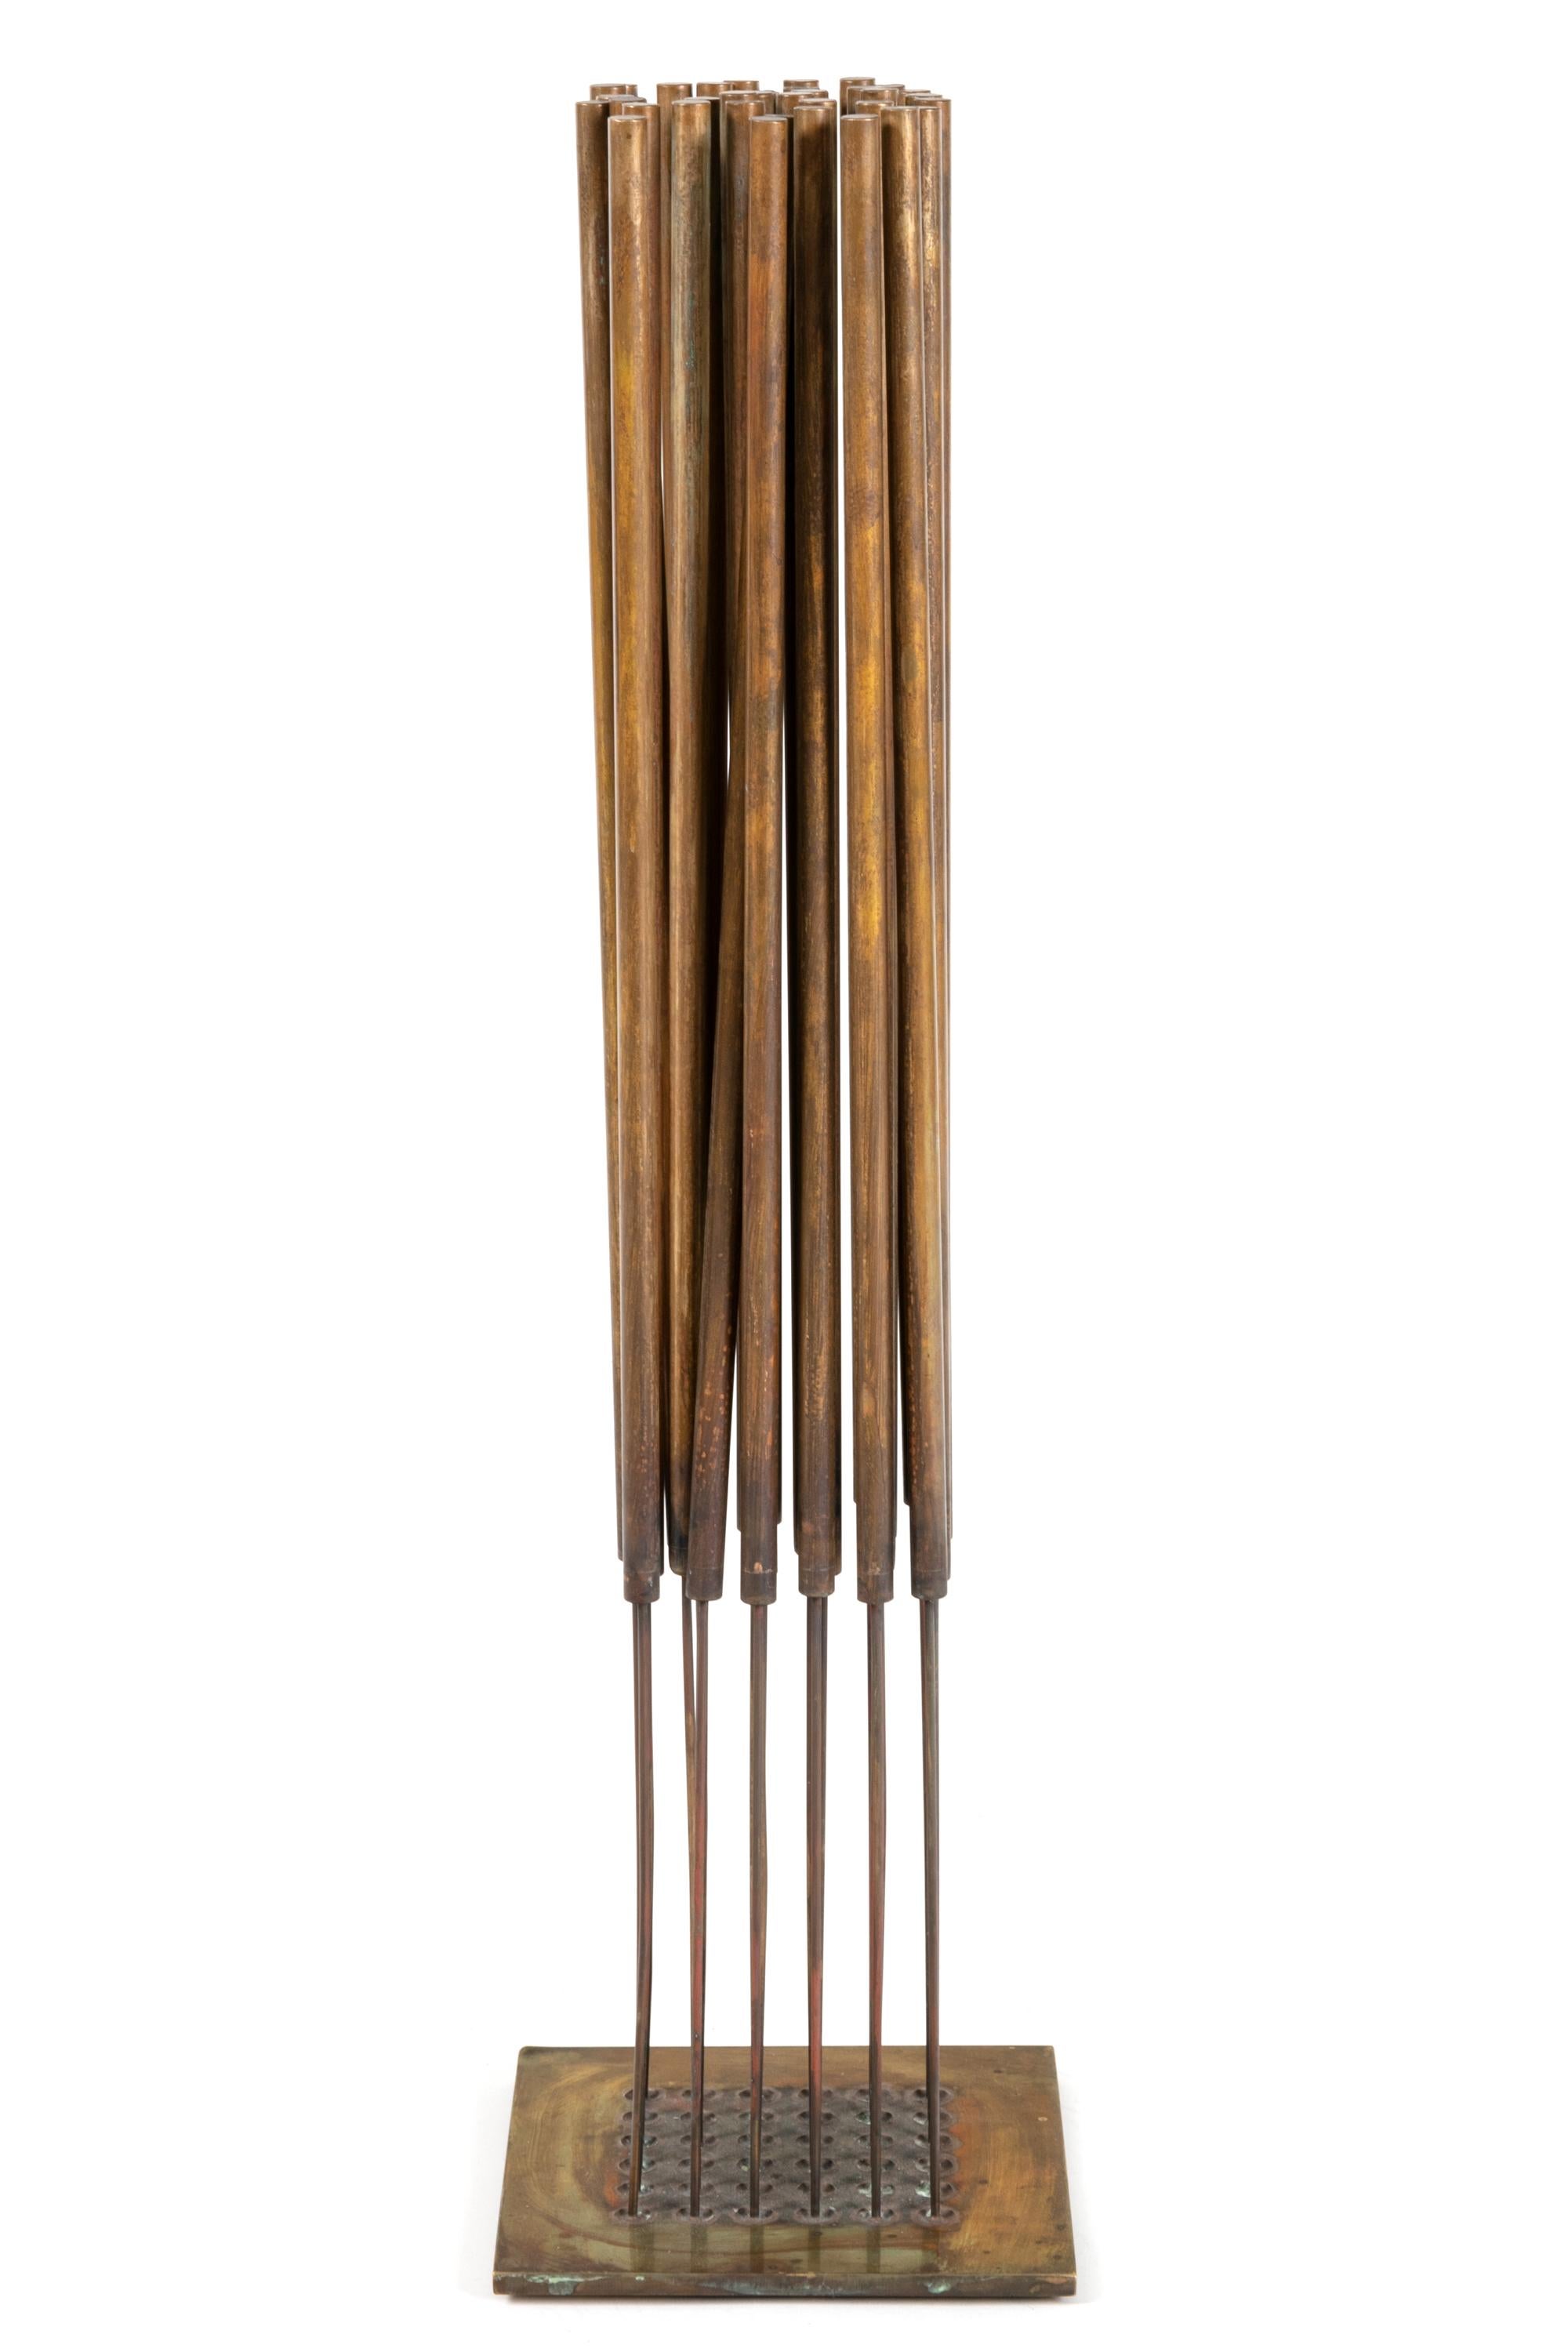 An unusual and wonderful example of Bertoia's sonambient sculptures. It has a very strong sounding quality for it's size due to the relationship between the rods and the cattails at the top of the rods. A rare piece for a collector of Bertoia's work.